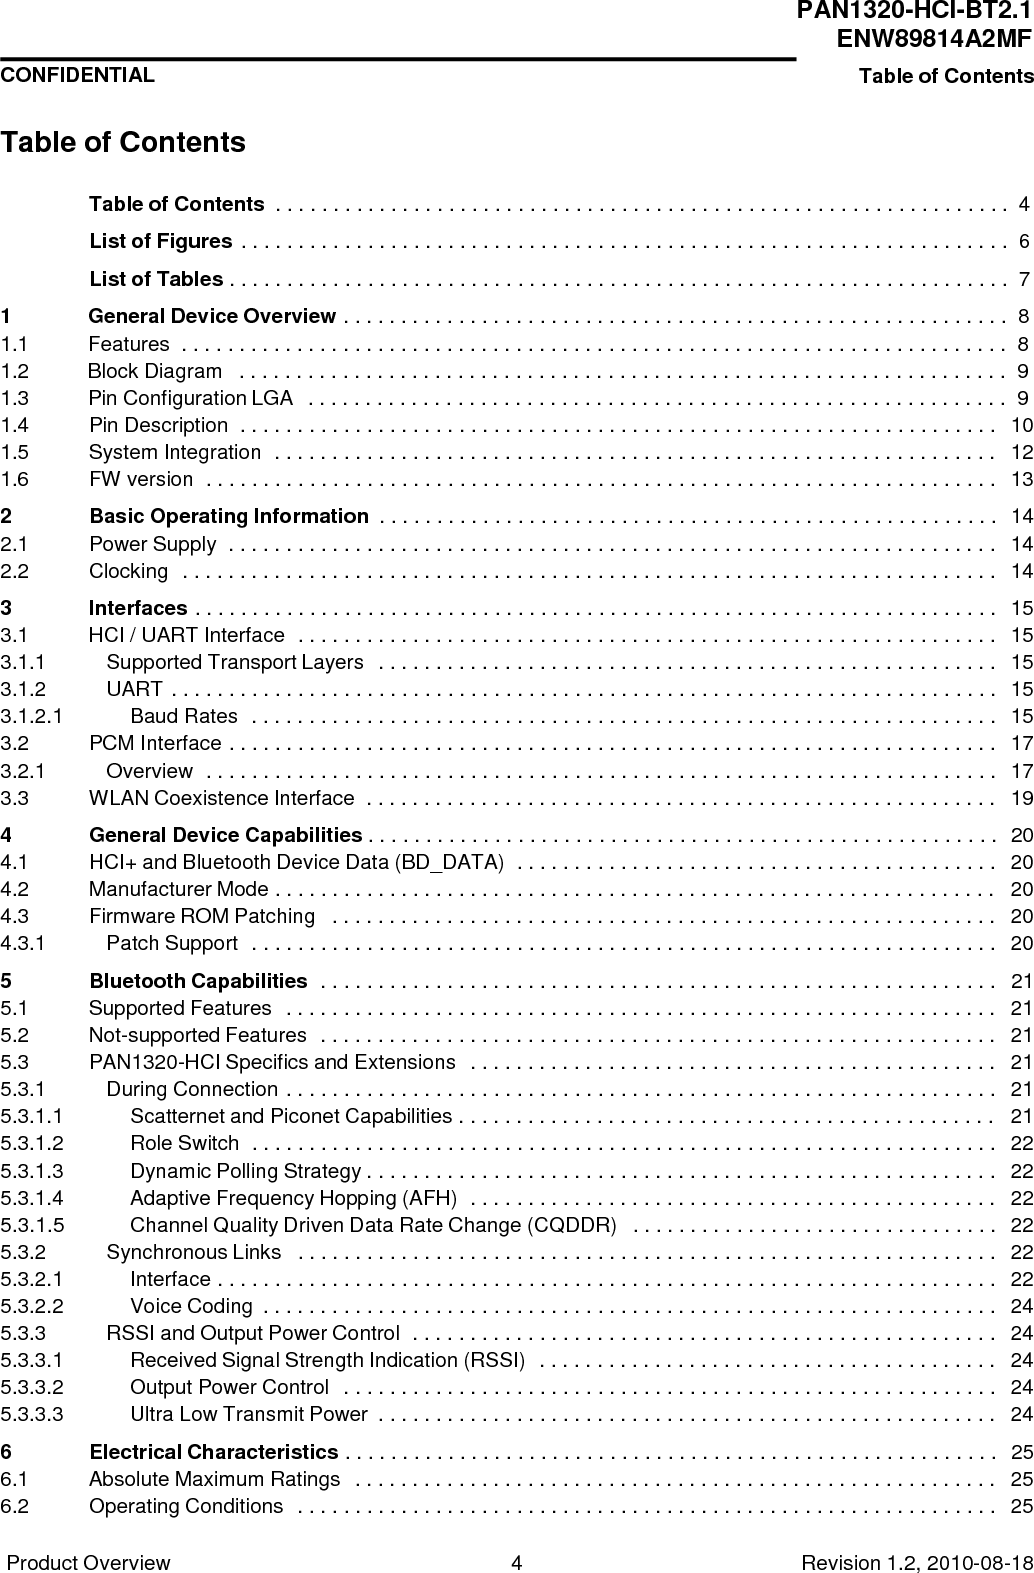 Product Overview 4 Revision 1.2, 2010-08-18   PAN1320-HCI-BT2.1 ENW89814A2MF CONFIDENTIAL Table of Contents     Table of Contents  Table of Contents . . . . . . . . . . . . . . . . . . . . . . . . . . . . . . . . . . . . . . . . . . . . . . . . . . . . . . . . . . . . . . . .  4  List of Figures . . . . . . . . . . . . . . . . . . . . . . . . . . . . . . . . . . . . . . . . . . . . . . . . . . . . . . . . . . . . . . . . . . .  6  List of Tables . . . . . . . . . . . . . . . . . . . . . . . . . . . . . . . . . . . . . . . . . . . . . . . . . . . . . . . . . . . . . . . . . . . .  7  1  General Device Overview . . . . . . . . . . . . . . . . . . . . . . . . . . . . . . . . . . . . . . . . . . . . . . . . . . . . . . . . . .  8 1.1  Features  . . . . . . . . . . . . . . . . . . . . . . . . . . . . . . . . . . . . . . . . . . . . . . . . . . . . . . . . . . . . . . . . . . . . . . . .  8 1.2  Block Diagram   . . . . . . . . . . . . . . . . . . . . . . . . . . . . . . . . . . . . . . . . . . . . . . . . . . . . . . . . . . . . . . . . . . .  9 1.3 Pin Configuration LGA  . . . . . . . . . . . . . . . . . . . . . . . . . . . . . . . . . . . . . . . . . . . . . . . . . . . . . . . . . . . . .  9 1.4 Pin Description  . . . . . . . . . . . . . . . . . . . . . . . . . . . . . . . . . . . . . . . . . . . . . . . . . . . . . . . . . . . . . . . . . . 10 1.5 System Integration  . . . . . . . . . . . . . . . . . . . . . . . . . . . . . . . . . . . . . . . . . . . . . . . . . . . . . . . . . . . . . . . 12 1.6 FW version  . . . . . . . . . . . . . . . . . . . . . . . . . . . . . . . . . . . . . . . . . . . . . . . . . . . . . . . . . . . . . . . . . . . . . 13 2 Basic Operating Information  . . . . . . . . . . . . . . . . . . . . . . . . . . . . . . . . . . . . . . . . . . . . . . . . . . . . . . 14 2.1 Power Supply  . . . . . . . . . . . . . . . . . . . . . . . . . . . . . . . . . . . . . . . . . . . . . . . . . . . . . . . . . . . . . . . . . . . 14 2.2 Clocking  . . . . . . . . . . . . . . . . . . . . . . . . . . . . . . . . . . . . . . . . . . . . . . . . . . . . . . . . . . . . . . . . . . . . . . . 14 3 Interfaces . . . . . . . . . . . . . . . . . . . . . . . . . . . . . . . . . . . . . . . . . . . . . . . . . . . . . . . . . . . . . . . . . . . . . . 15 3.1 HCI / UART Interface  . . . . . . . . . . . . . . . . . . . . . . . . . . . . . . . . . . . . . . . . . . . . . . . . . . . . . . . . . . . . . 15 3.1.1 Supported Transport Layers  . . . . . . . . . . . . . . . . . . . . . . . . . . . . . . . . . . . . . . . . . . . . . . . . . . . . . . 15 3.1.2 UART . . . . . . . . . . . . . . . . . . . . . . . . . . . . . . . . . . . . . . . . . . . . . . . . . . . . . . . . . . . . . . . . . . . . . . . . 15 3.1.2.1 Baud Rates  . . . . . . . . . . . . . . . . . . . . . . . . . . . . . . . . . . . . . . . . . . . . . . . . . . . . . . . . . . . . . . . . . 15 3.2 PCM Interface . . . . . . . . . . . . . . . . . . . . . . . . . . . . . . . . . . . . . . . . . . . . . . . . . . . . . . . . . . . . . . . . . . . 17 3.2.1 Overview  . . . . . . . . . . . . . . . . . . . . . . . . . . . . . . . . . . . . . . . . . . . . . . . . . . . . . . . . . . . . . . . . . . . . . 17 3.3 WLAN Coexistence Interface  . . . . . . . . . . . . . . . . . . . . . . . . . . . . . . . . . . . . . . . . . . . . . . . . . . . . . . . 19 4 General Device Capabilities . . . . . . . . . . . . . . . . . . . . . . . . . . . . . . . . . . . . . . . . . . . . . . . . . . . . . . . 20 4.1 HCI+ and Bluetooth Device Data (BD_DATA)  . . . . . . . . . . . . . . . . . . . . . . . . . . . . . . . . . . . . . . . . . . 20 4.2 Manufacturer Mode . . . . . . . . . . . . . . . . . . . . . . . . . . . . . . . . . . . . . . . . . . . . . . . . . . . . . . . . . . . . . . . 20 4.3 Firmware ROM Patching   . . . . . . . . . . . . . . . . . . . . . . . . . . . . . . . . . . . . . . . . . . . . . . . . . . . . . . . . . . 20 4.3.1 Patch Support  . . . . . . . . . . . . . . . . . . . . . . . . . . . . . . . . . . . . . . . . . . . . . . . . . . . . . . . . . . . . . . . . . 20 5 Bluetooth Capabilities  . . . . . . . . . . . . . . . . . . . . . . . . . . . . . . . . . . . . . . . . . . . . . . . . . . . . . . . . . . . 21 5.1 Supported Features  . . . . . . . . . . . . . . . . . . . . . . . . . . . . . . . . . . . . . . . . . . . . . . . . . . . . . . . . . . . . . . 21 5.2 Not-supported Features  . . . . . . . . . . . . . . . . . . . . . . . . . . . . . . . . . . . . . . . . . . . . . . . . . . . . . . . . . . . 21 5.3 PAN1320-HCI Specifics and Extensions  . . . . . . . . . . . . . . . . . . . . . . . . . . . . . . . . . . . . . . . . . . . . . . 21 5.3.1 During Connection . . . . . . . . . . . . . . . . . . . . . . . . . . . . . . . . . . . . . . . . . . . . . . . . . . . . . . . . . . . . . . 21 5.3.1.1 Scatternet and Piconet Capabilities . . . . . . . . . . . . . . . . . . . . . . . . . . . . . . . . . . . . . . . . . . . . . . . 21 5.3.1.2 Role Switch  . . . . . . . . . . . . . . . . . . . . . . . . . . . . . . . . . . . . . . . . . . . . . . . . . . . . . . . . . . . . . . . . . 22 5.3.1.3 Dynamic Polling Strategy . . . . . . . . . . . . . . . . . . . . . . . . . . . . . . . . . . . . . . . . . . . . . . . . . . . . . . . 22 5.3.1.4 Adaptive Frequency Hopping (AFH)  . . . . . . . . . . . . . . . . . . . . . . . . . . . . . . . . . . . . . . . . . . . . . . 22 5.3.1.5 Channel Quality Driven Data Rate Change (CQDDR)  . . . . . . . . . . . . . . . . . . . . . . . . . . . . . . . . 22 5.3.2 Synchronous Links  . . . . . . . . . . . . . . . . . . . . . . . . . . . . . . . . . . . . . . . . . . . . . . . . . . . . . . . . . . . . . 22 5.3.2.1 Interface . . . . . . . . . . . . . . . . . . . . . . . . . . . . . . . . . . . . . . . . . . . . . . . . . . . . . . . . . . . . . . . . . . . . 22 5.3.2.2 Voice Coding  . . . . . . . . . . . . . . . . . . . . . . . . . . . . . . . . . . . . . . . . . . . . . . . . . . . . . . . . . . . . . . . . 24 5.3.3 RSSI and Output Power Control  . . . . . . . . . . . . . . . . . . . . . . . . . . . . . . . . . . . . . . . . . . . . . . . . . . . 24 5.3.3.1 Received Signal Strength Indication (RSSI)  . . . . . . . . . . . . . . . . . . . . . . . . . . . . . . . . . . . . . . . . 24 5.3.3.2 Output Power Control  . . . . . . . . . . . . . . . . . . . . . . . . . . . . . . . . . . . . . . . . . . . . . . . . . . . . . . . . . 24 5.3.3.3 Ultra Low Transmit Power  . . . . . . . . . . . . . . . . . . . . . . . . . . . . . . . . . . . . . . . . . . . . . . . . . . . . . . 24 6 Electrical Characteristics . . . . . . . . . . . . . . . . . . . . . . . . . . . . . . . . . . . . . . . . . . . . . . . . . . . . . . . . . 25 6.1 Absolute Maximum Ratings  . . . . . . . . . . . . . . . . . . . . . . . . . . . . . . . . . . . . . . . . . . . . . . . . . . . . . . . . 25 6.2 Operating Conditions  . . . . . . . . . . . . . . . . . . . . . . . . . . . . . . . . . . . . . . . . . . . . . . . . . . . . . . . . . . . . . 25 